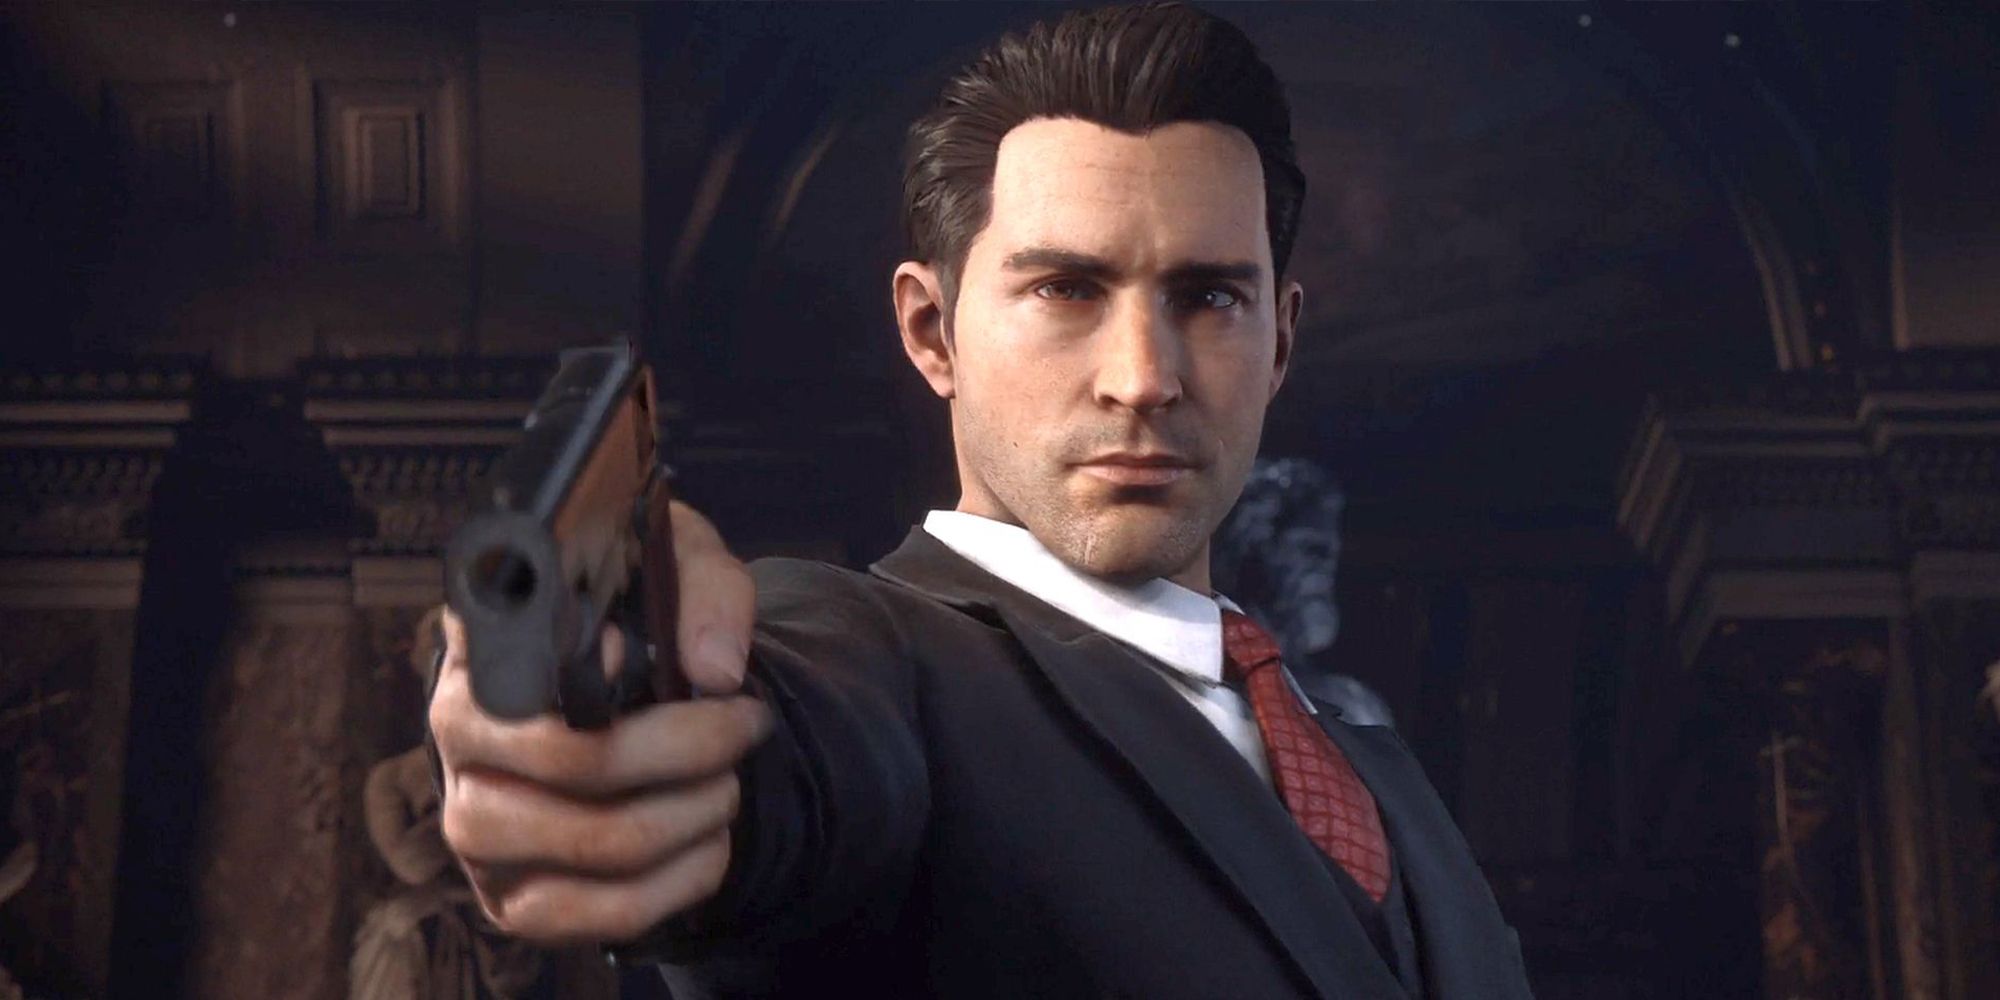 The 10 Best Gangster Games For PS5 According To Metacritic